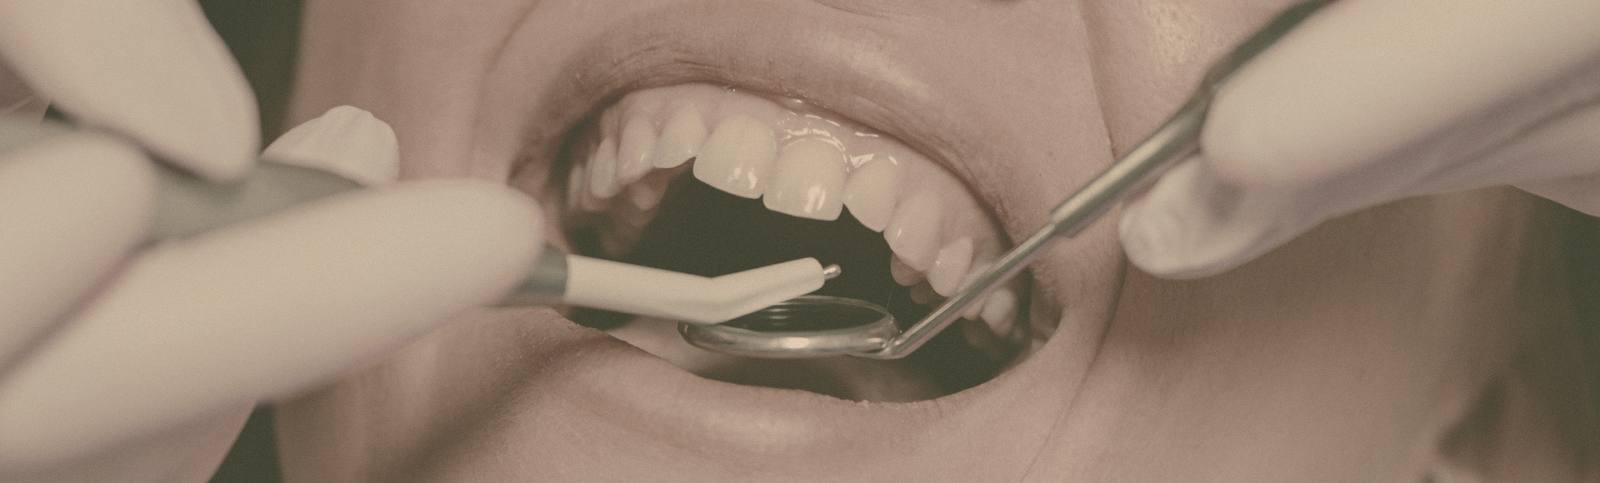 How To Treat Gum Infections